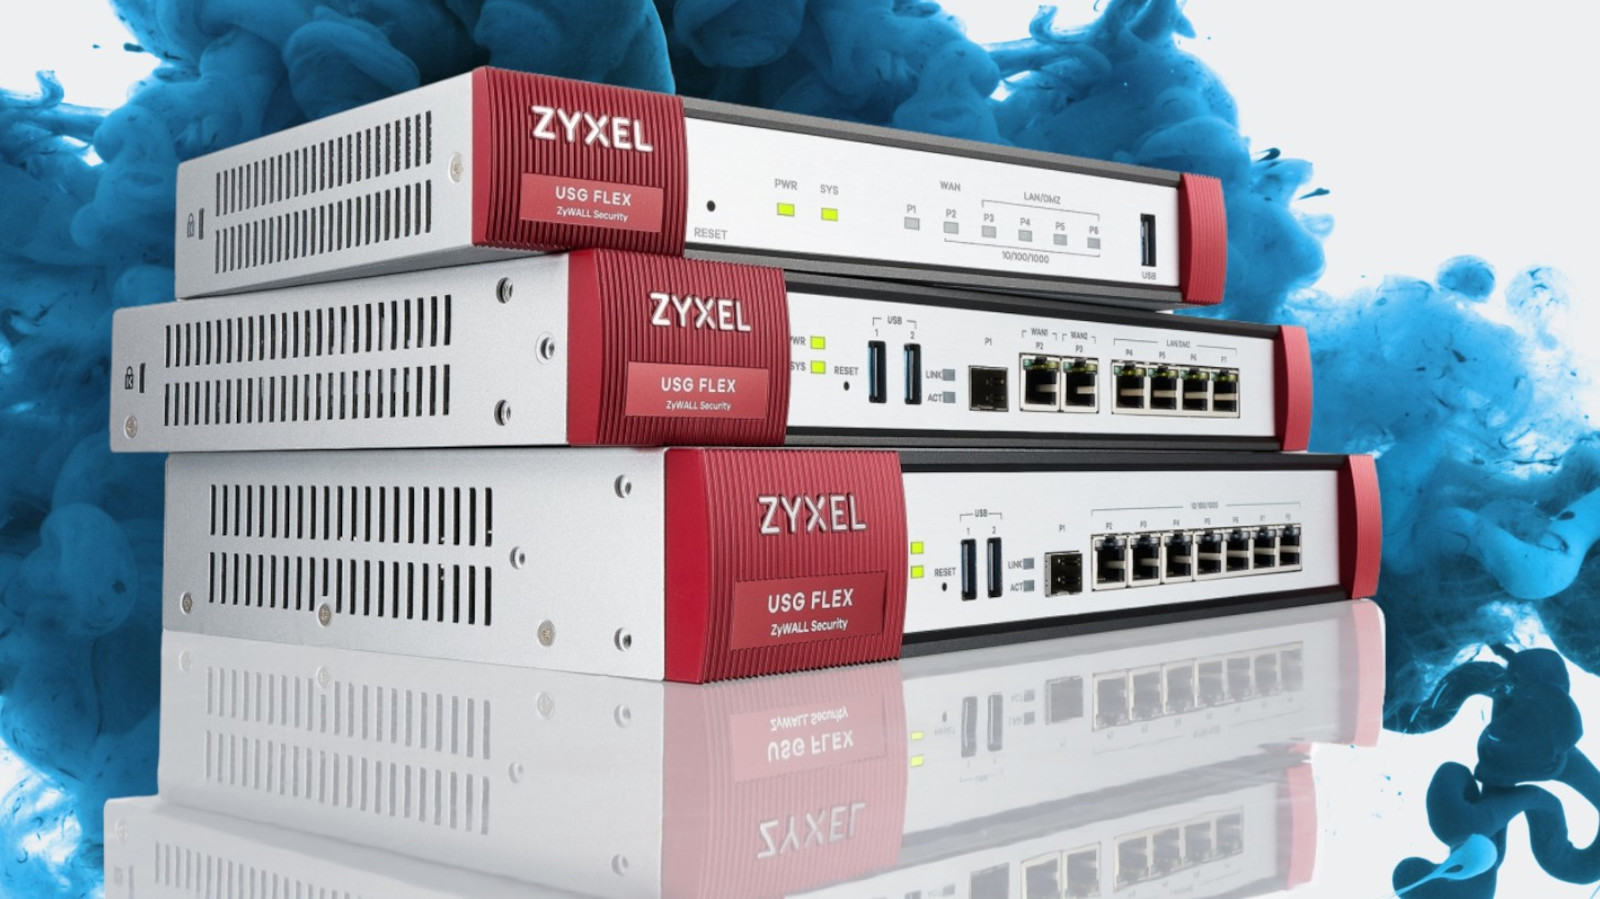 Zyxel fixed a critical RCE flaw in its firewall devices and urges customers to install the patches